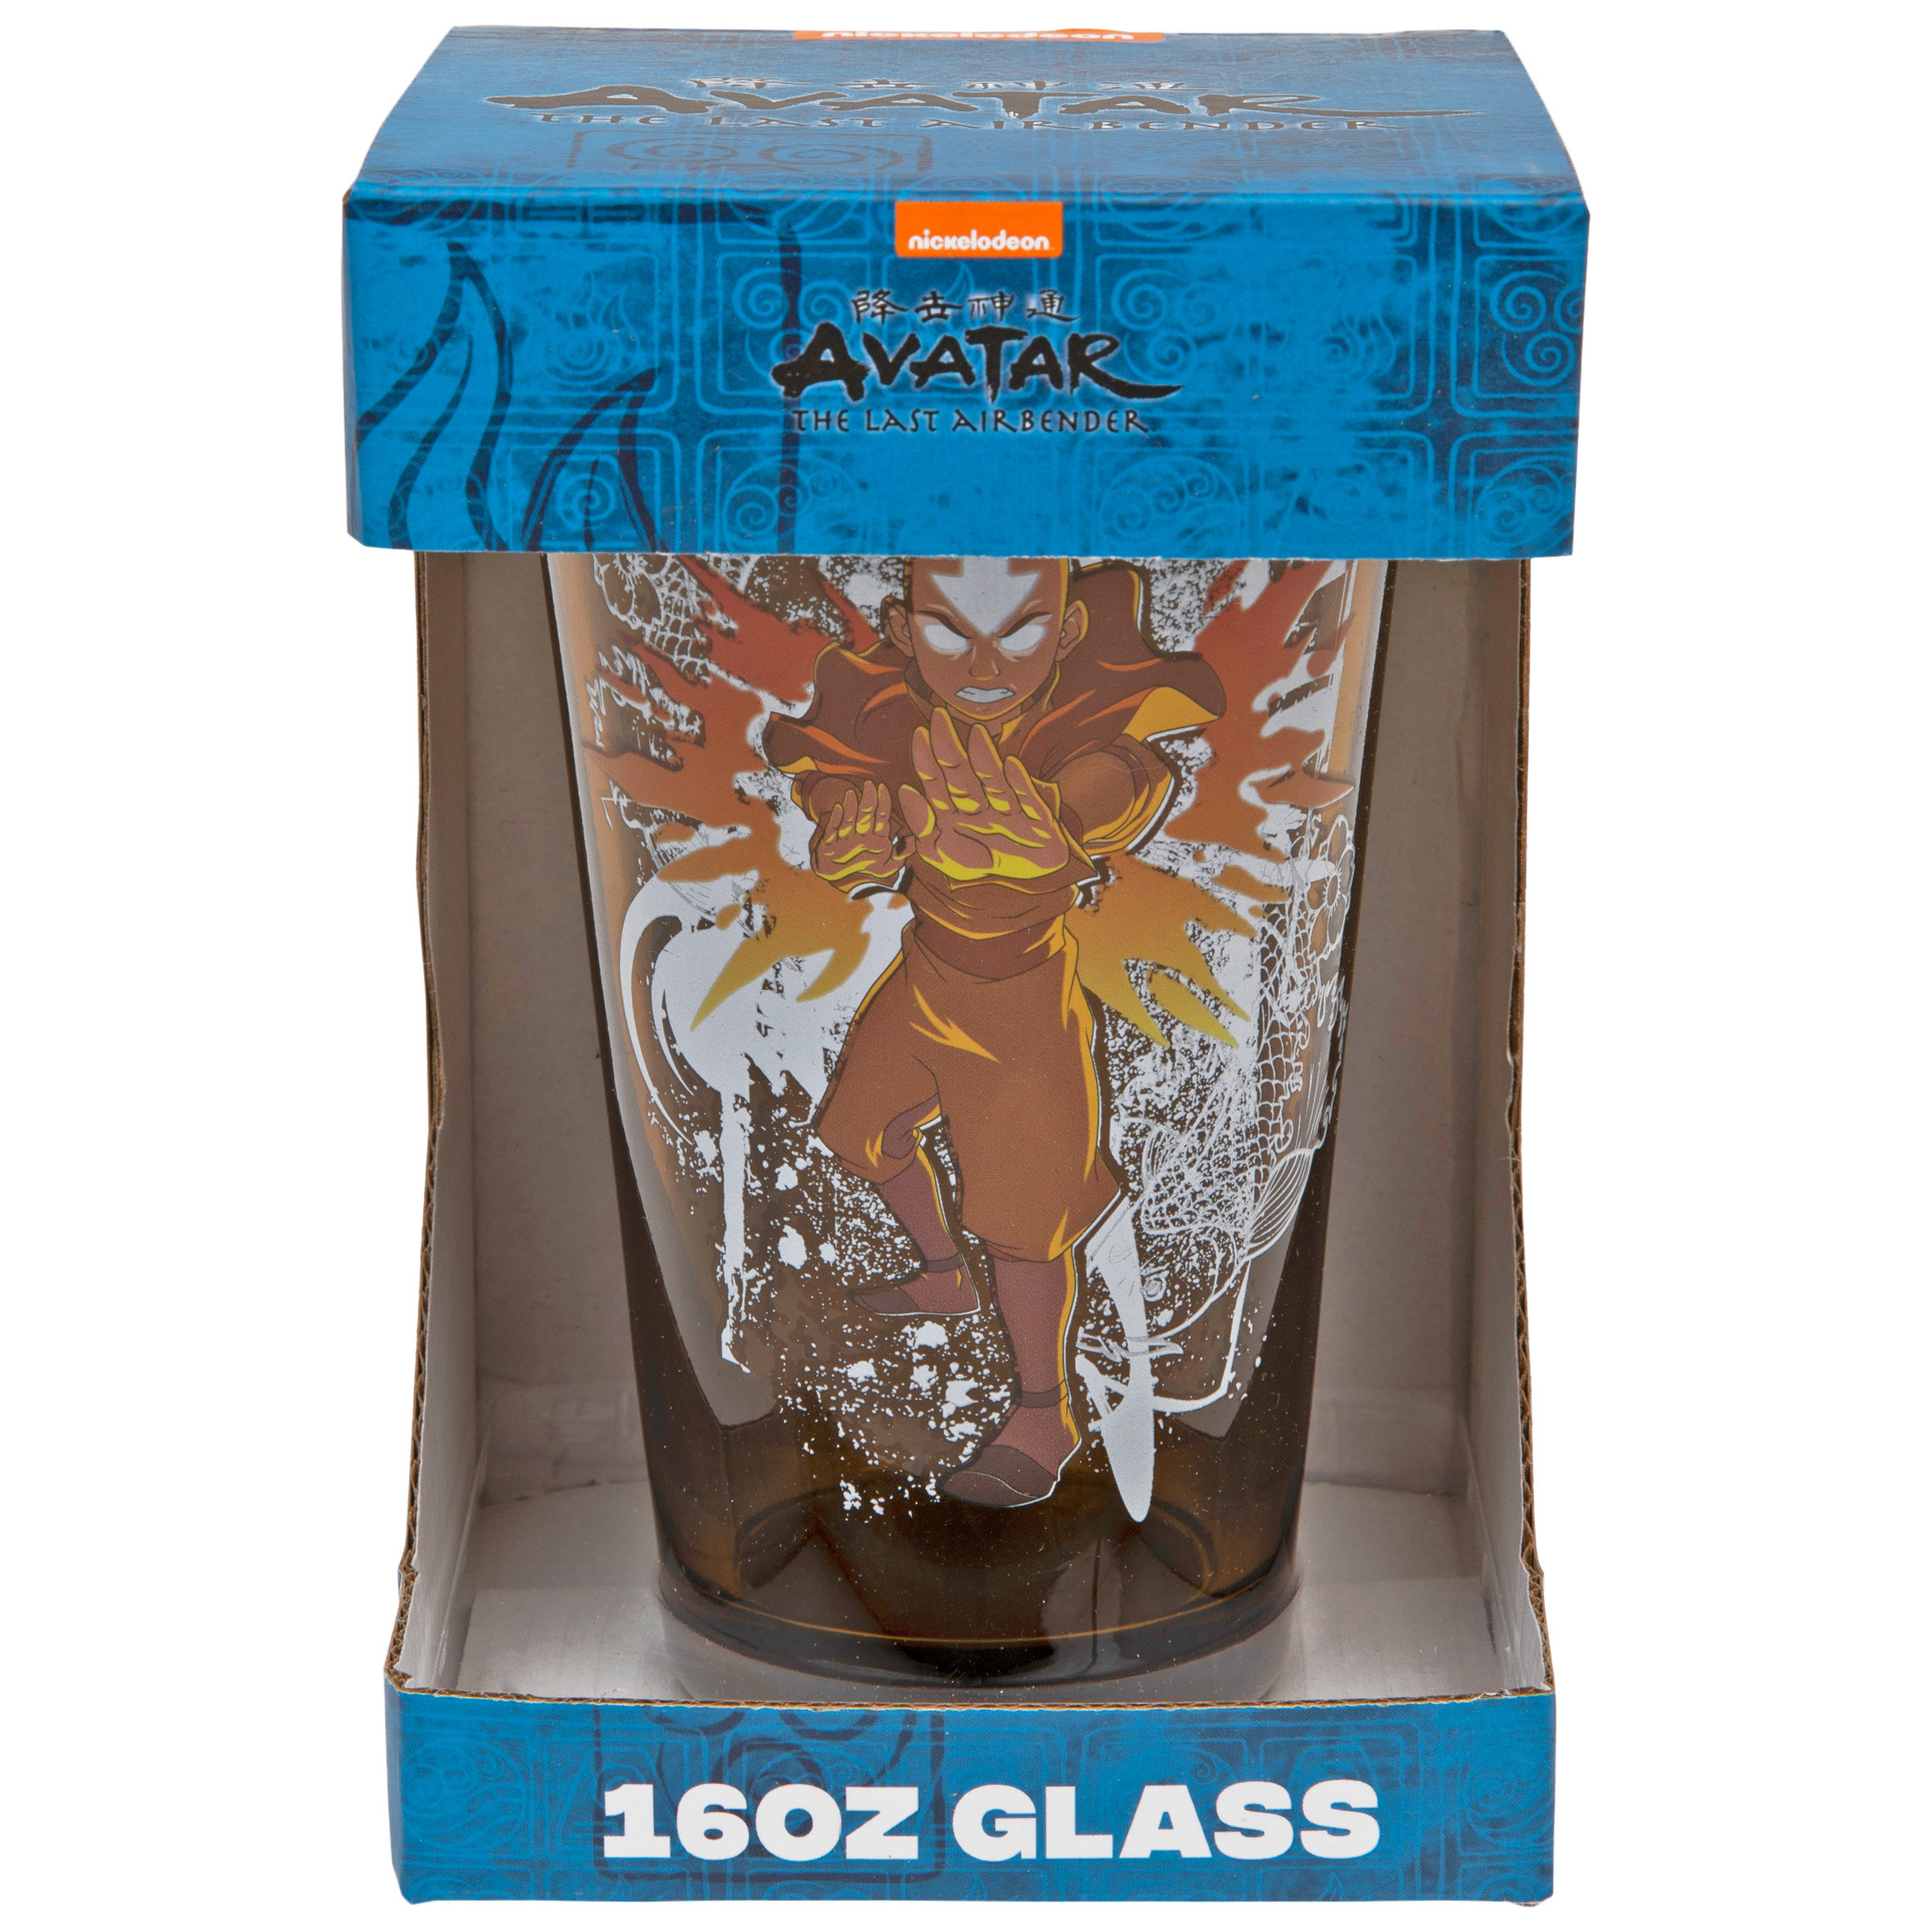 Avatar: The Last Airbender Colored Pint Glass